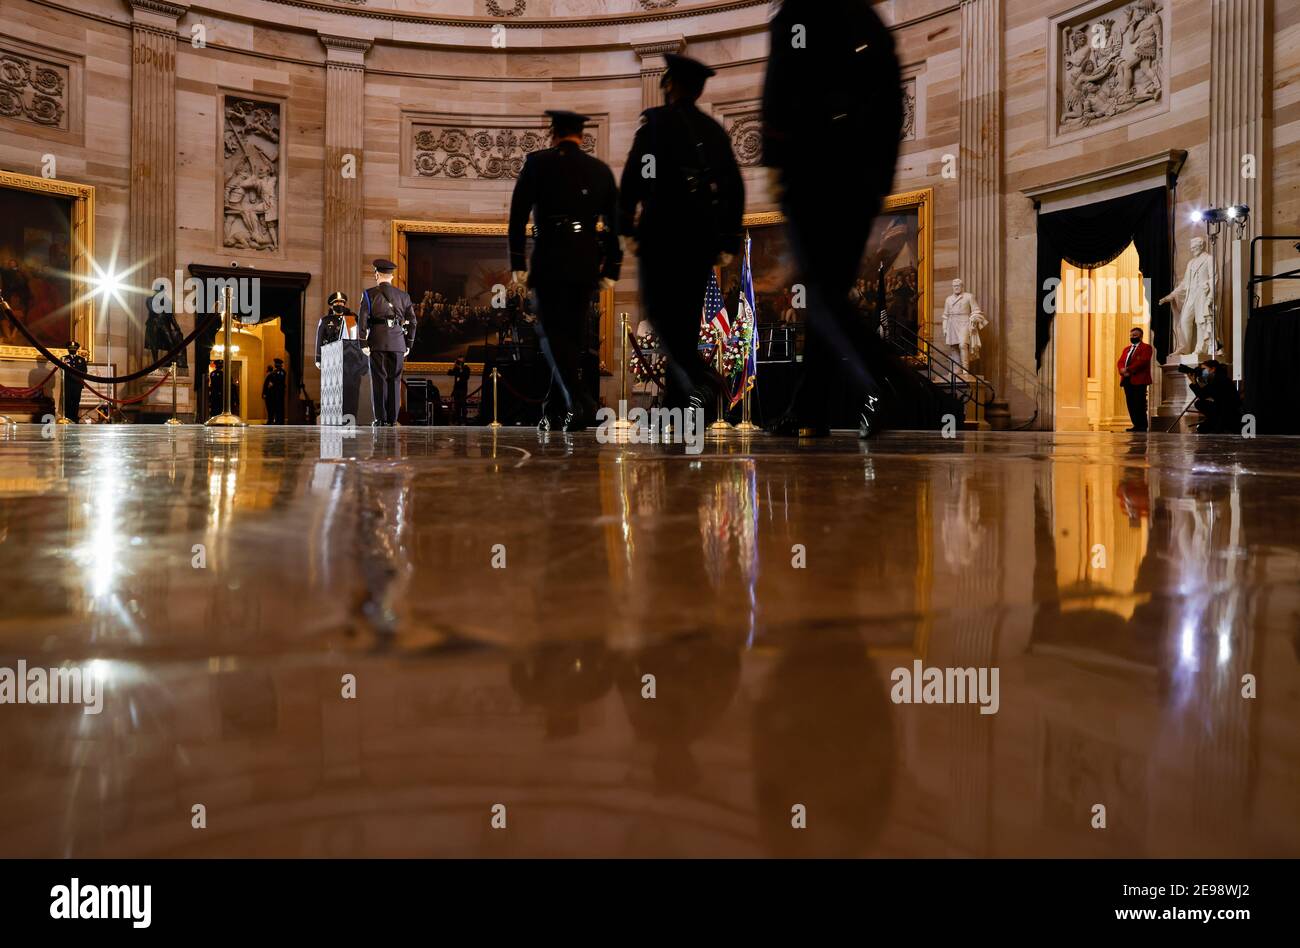 Washigton, USA. 03rd Feb, 2021. U.S. Capitol Police Officers arrive to pay their respects as the remains of Capitol Police officer Brian Sicknick lay in honor in the Rotunda of the U.S. Capitol building after he died on Jan. 7 from injuries he sustained while protecting the U.S. Capitol during the Jan. 6 attack on the building, in Washington, DC, U.S. February 3, 2021. (Photo by Carlos Barria/Pool/Sipa USA) Credit: Sipa USA/Alamy Live News Stock Photo